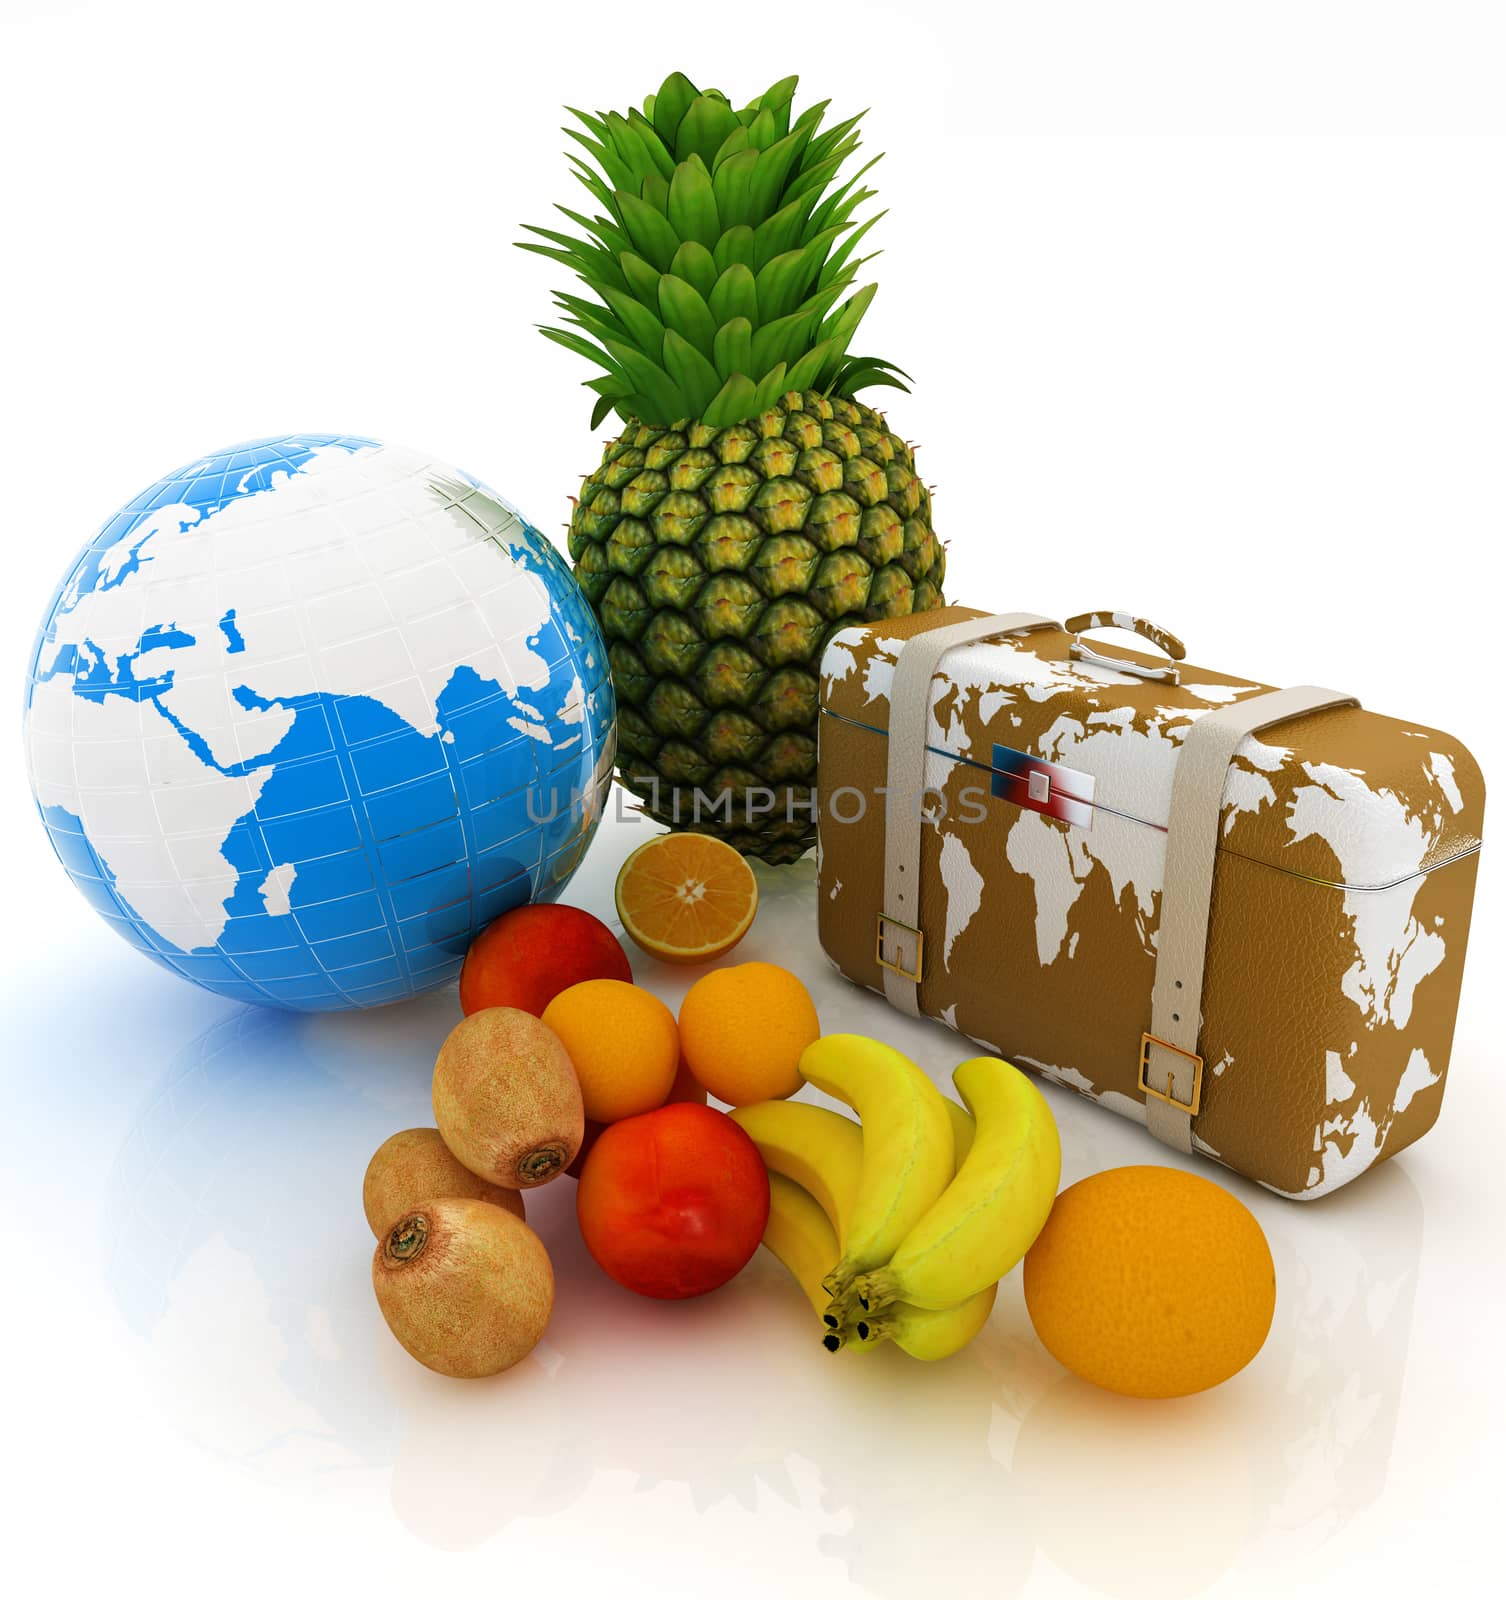 Citrus,earth and traveler's suitcase  by Guru3D